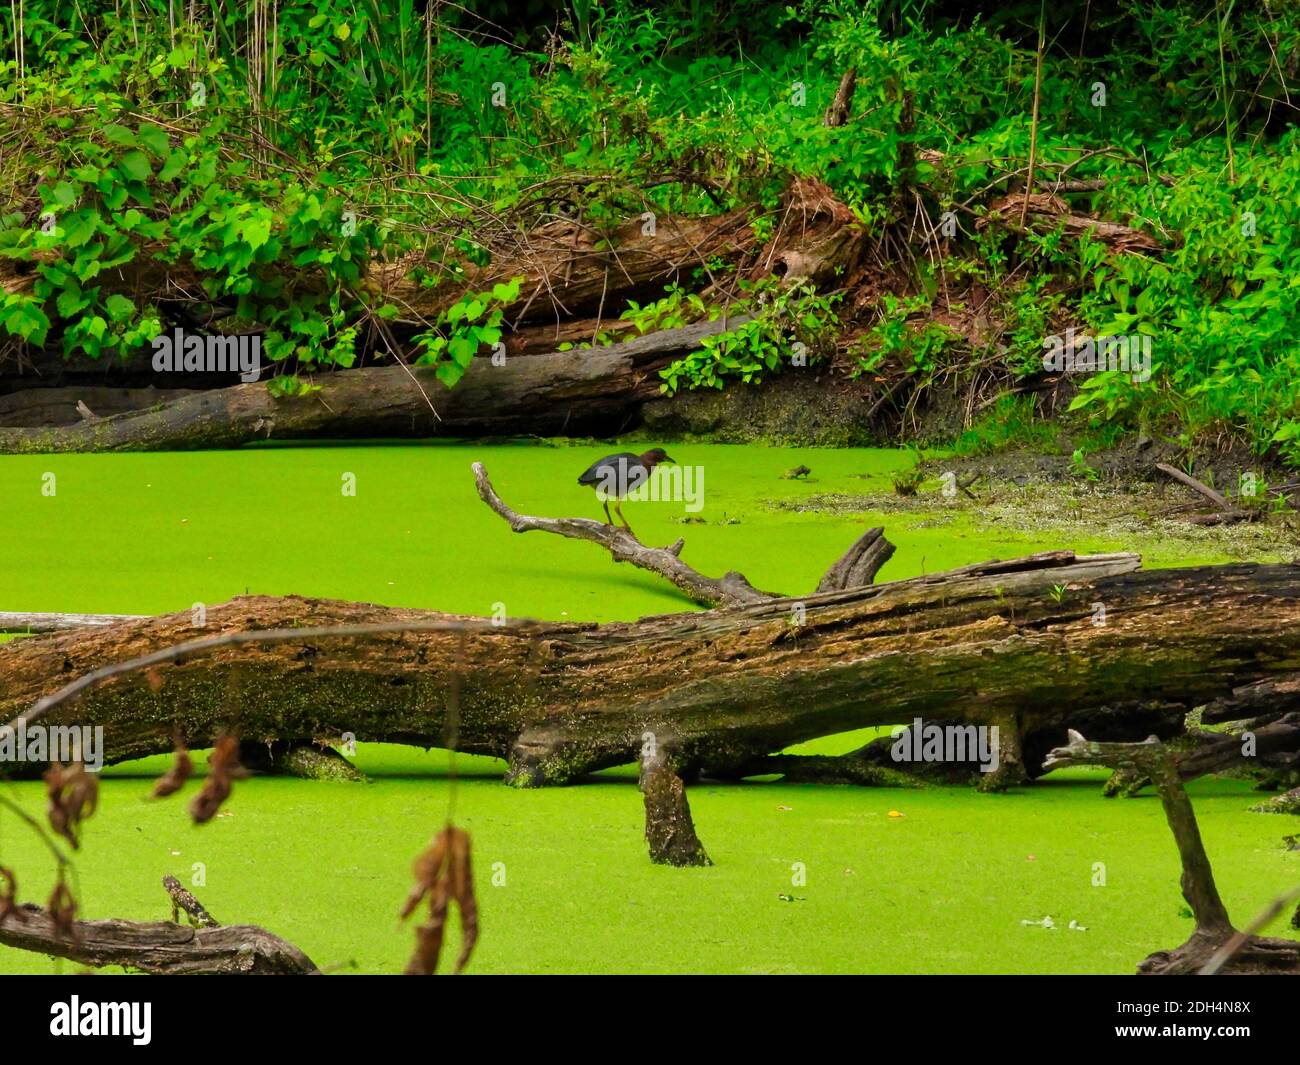 Heron on a tree branch: Landscape view of pond with a full, bright green duckweed bloom covering the surface with a fallen tree trunk and green fauna Stock Photo